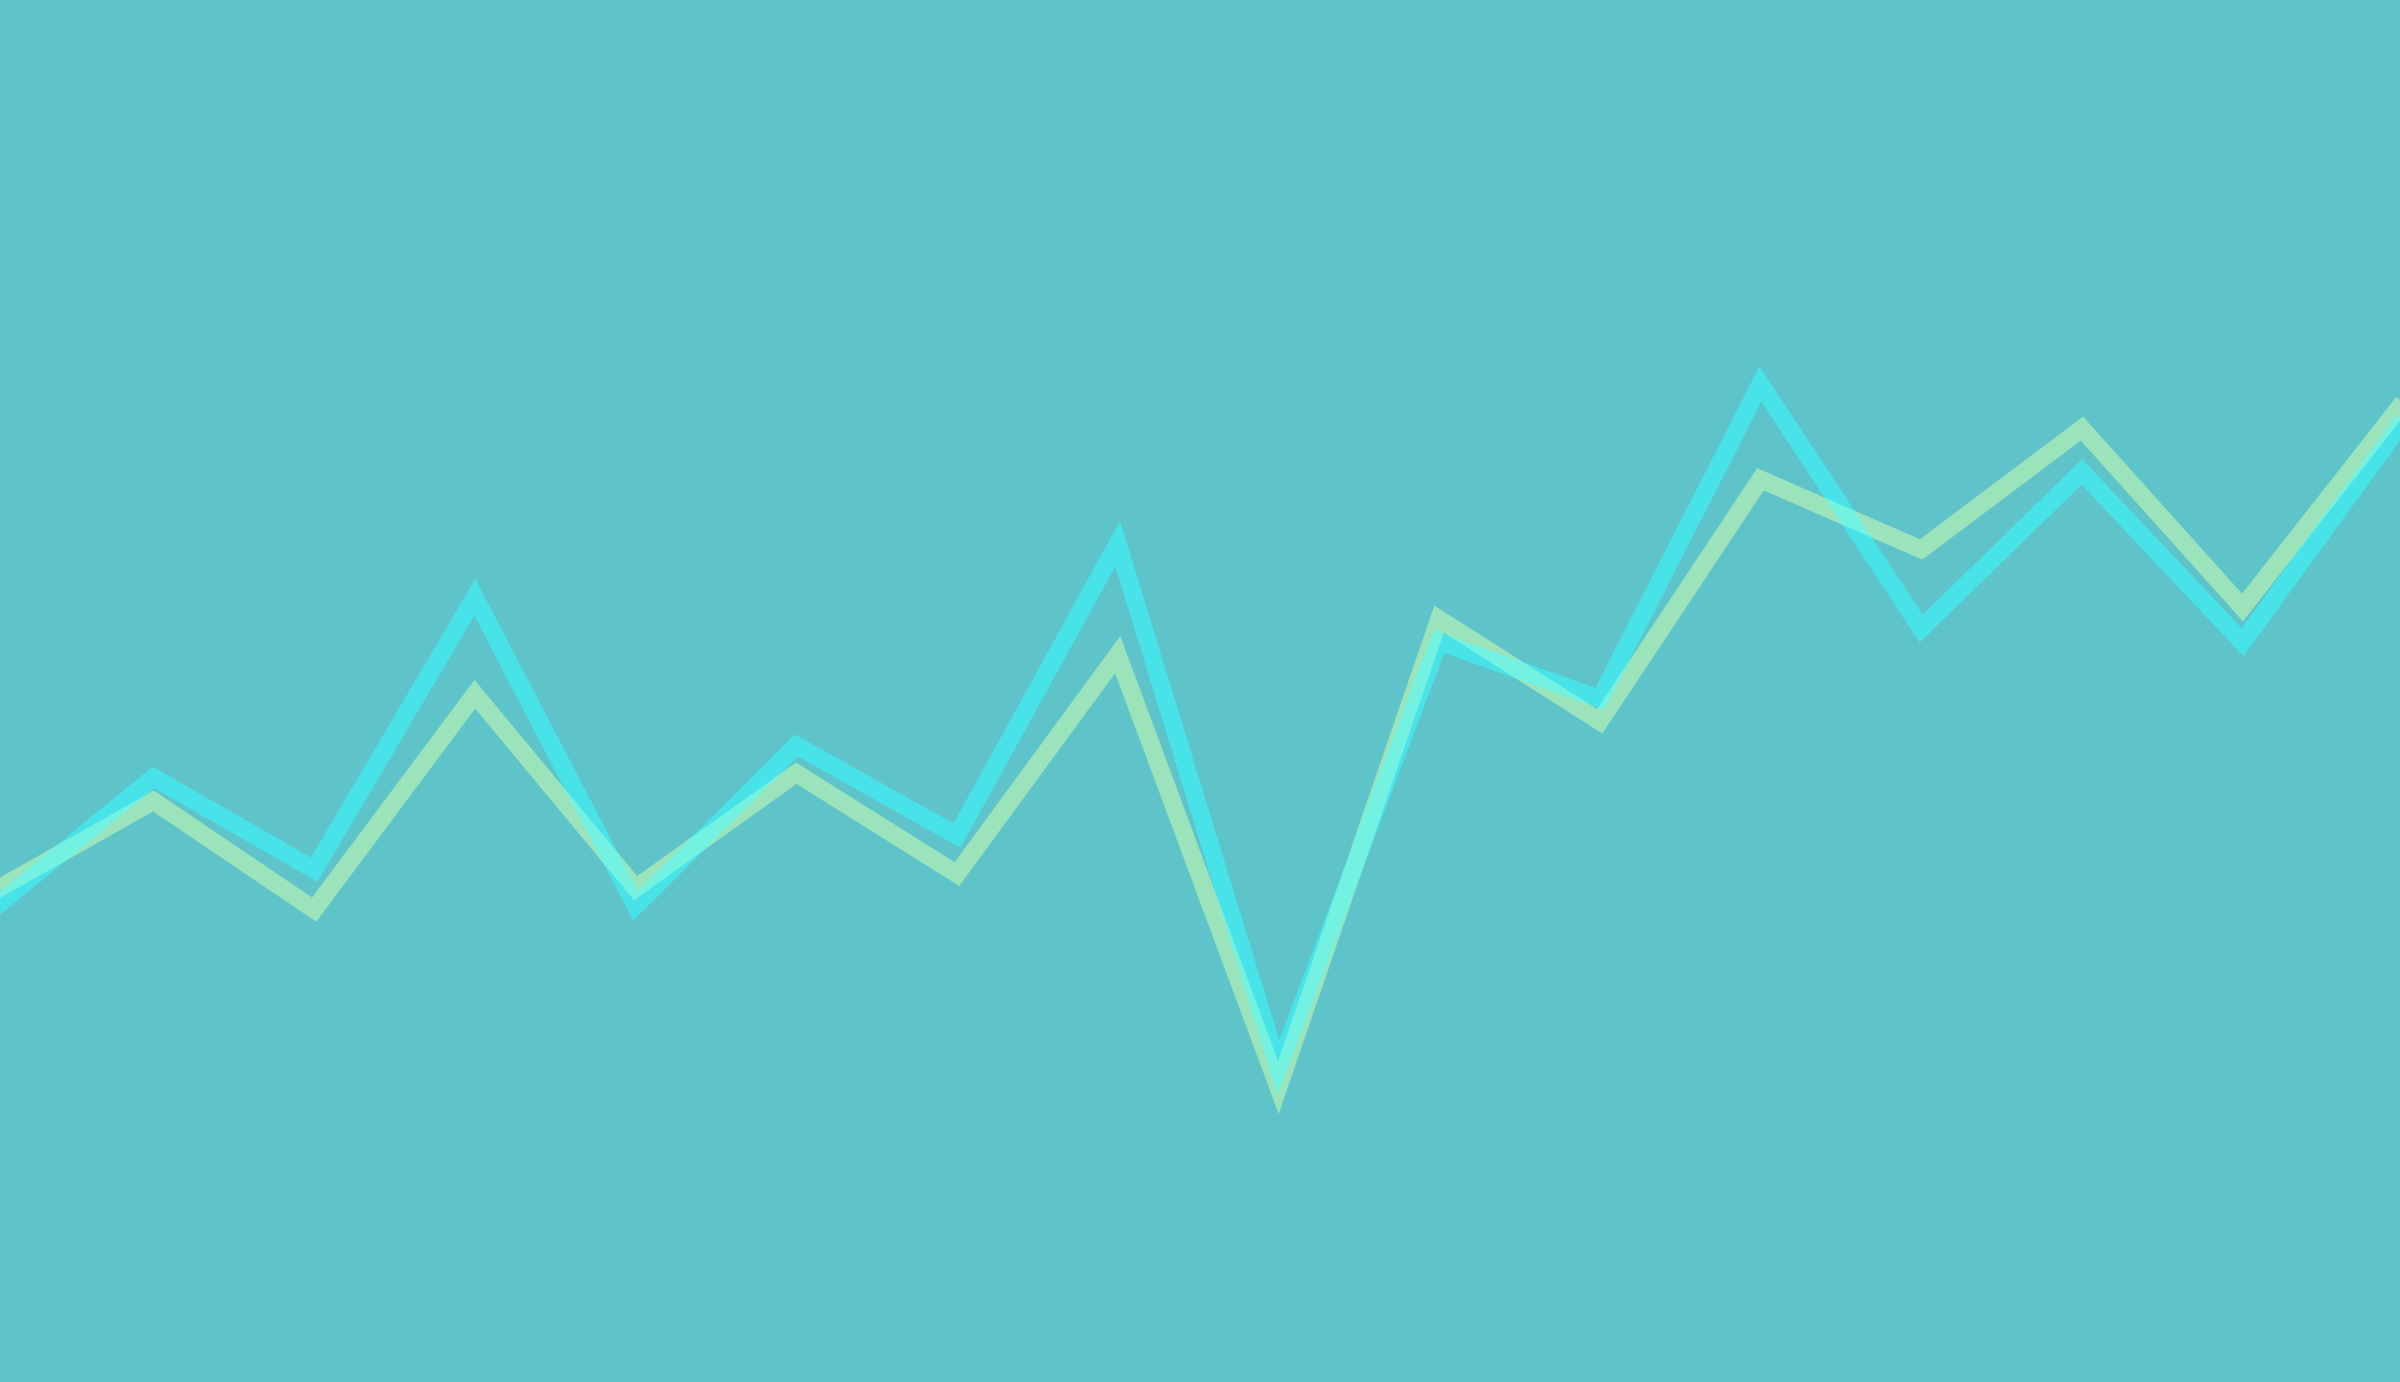 two closely correlated trend lines - one in teal, one in green, against a blue/green background